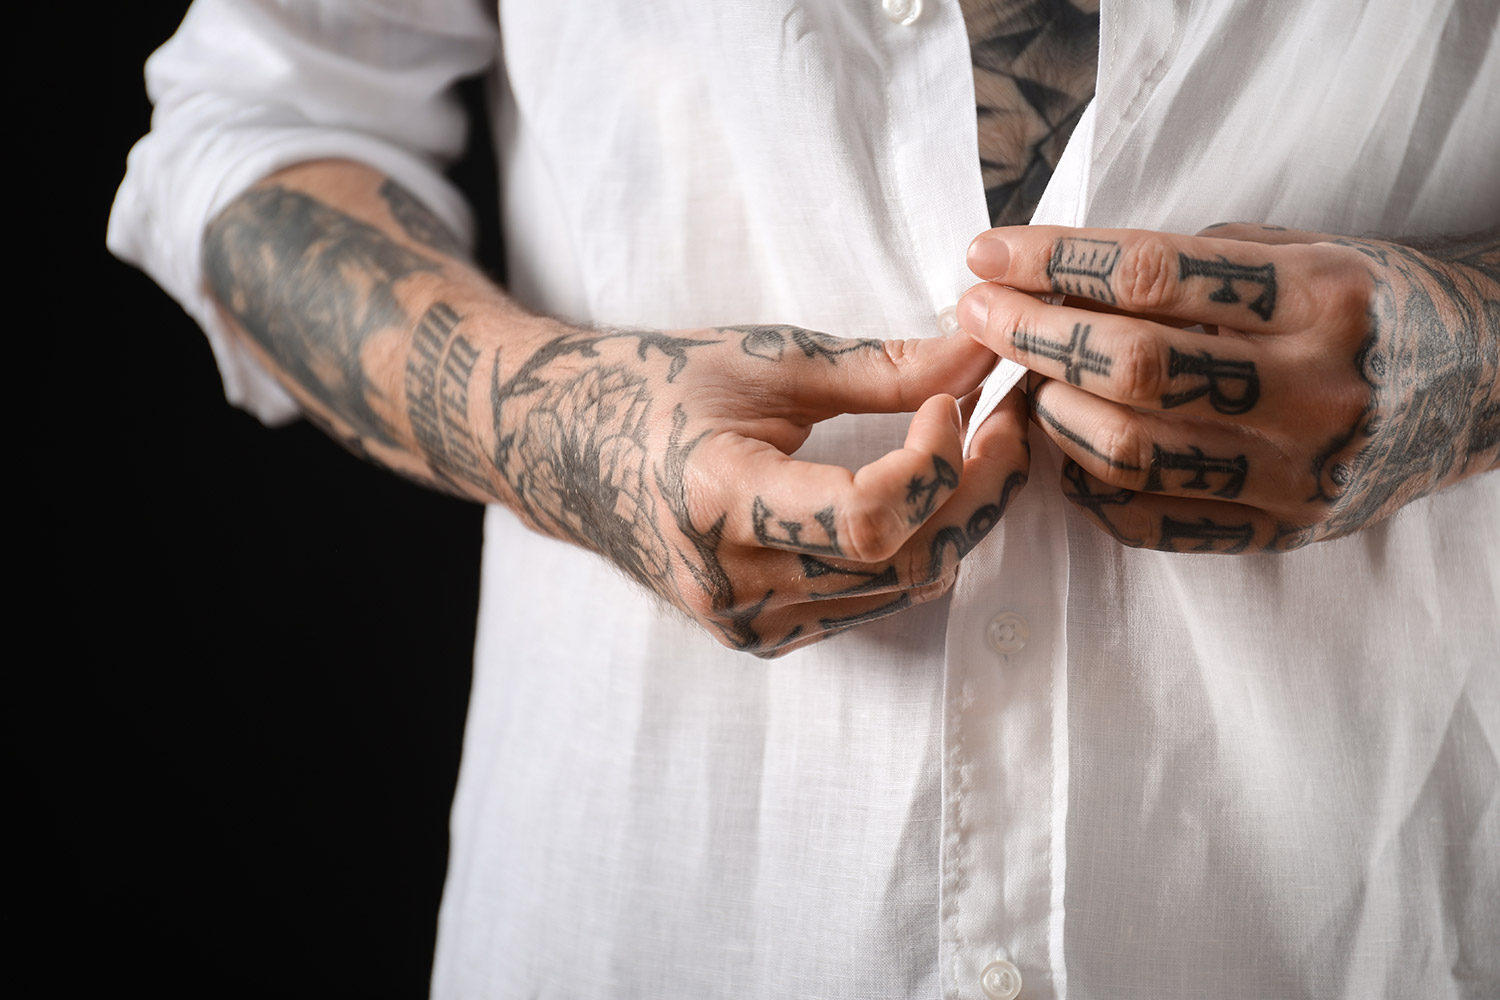 101 Boys Hand Tattoo Designs That Will Blow Your Mind!